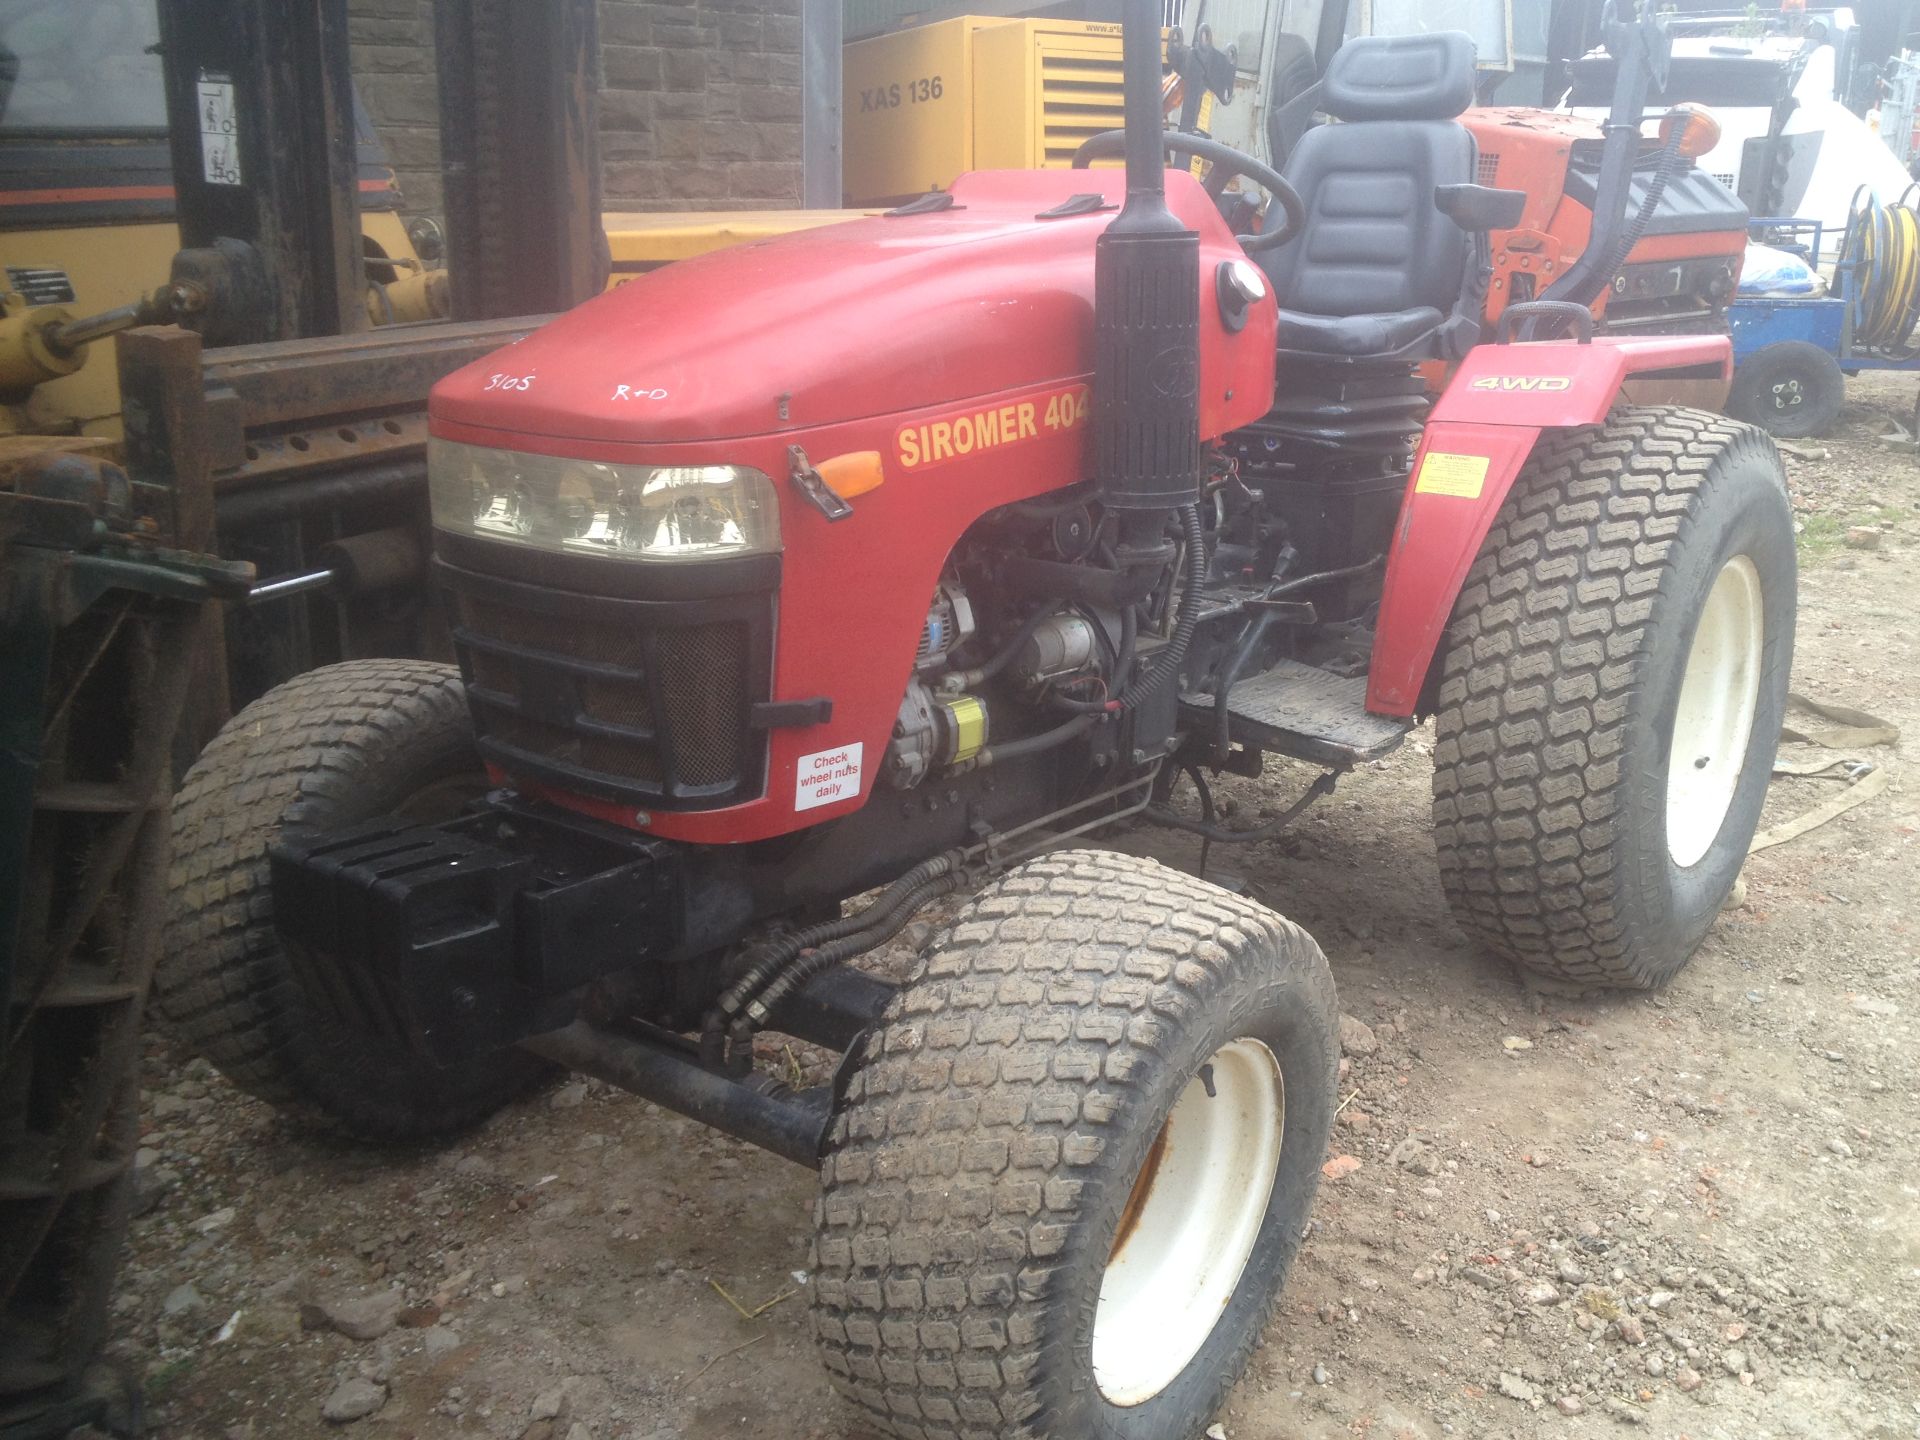 2004 SIROMER 204S 404 TRACTOR 4X4 WITH POWER STEERING - Image 2 of 6